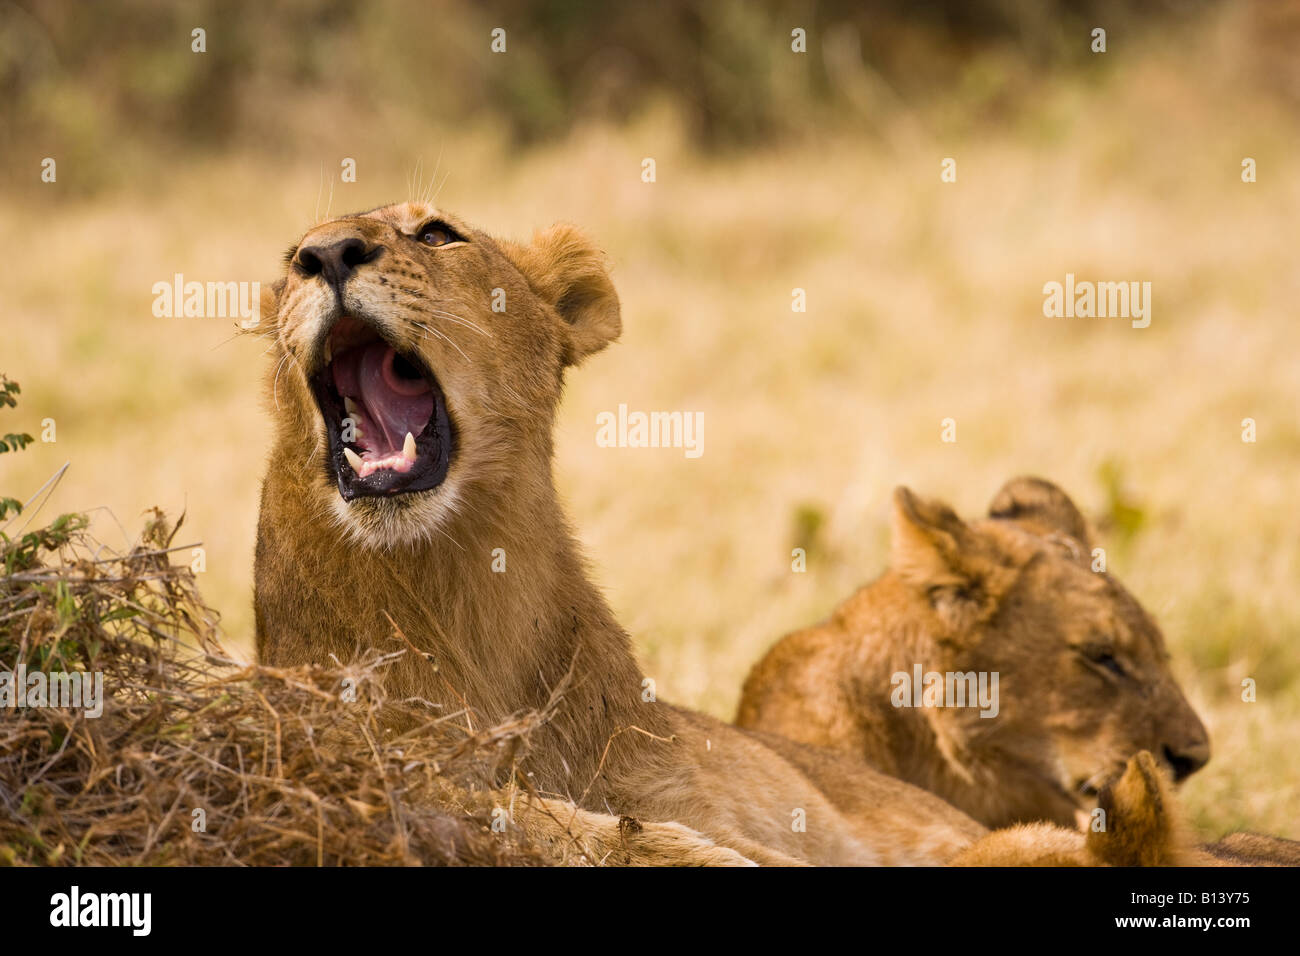 Humorous pose of young African lion mouth open wide, Panthera Leo, 1 singing while resting in warm sunlight 1 lion sleeping background Stock Photo